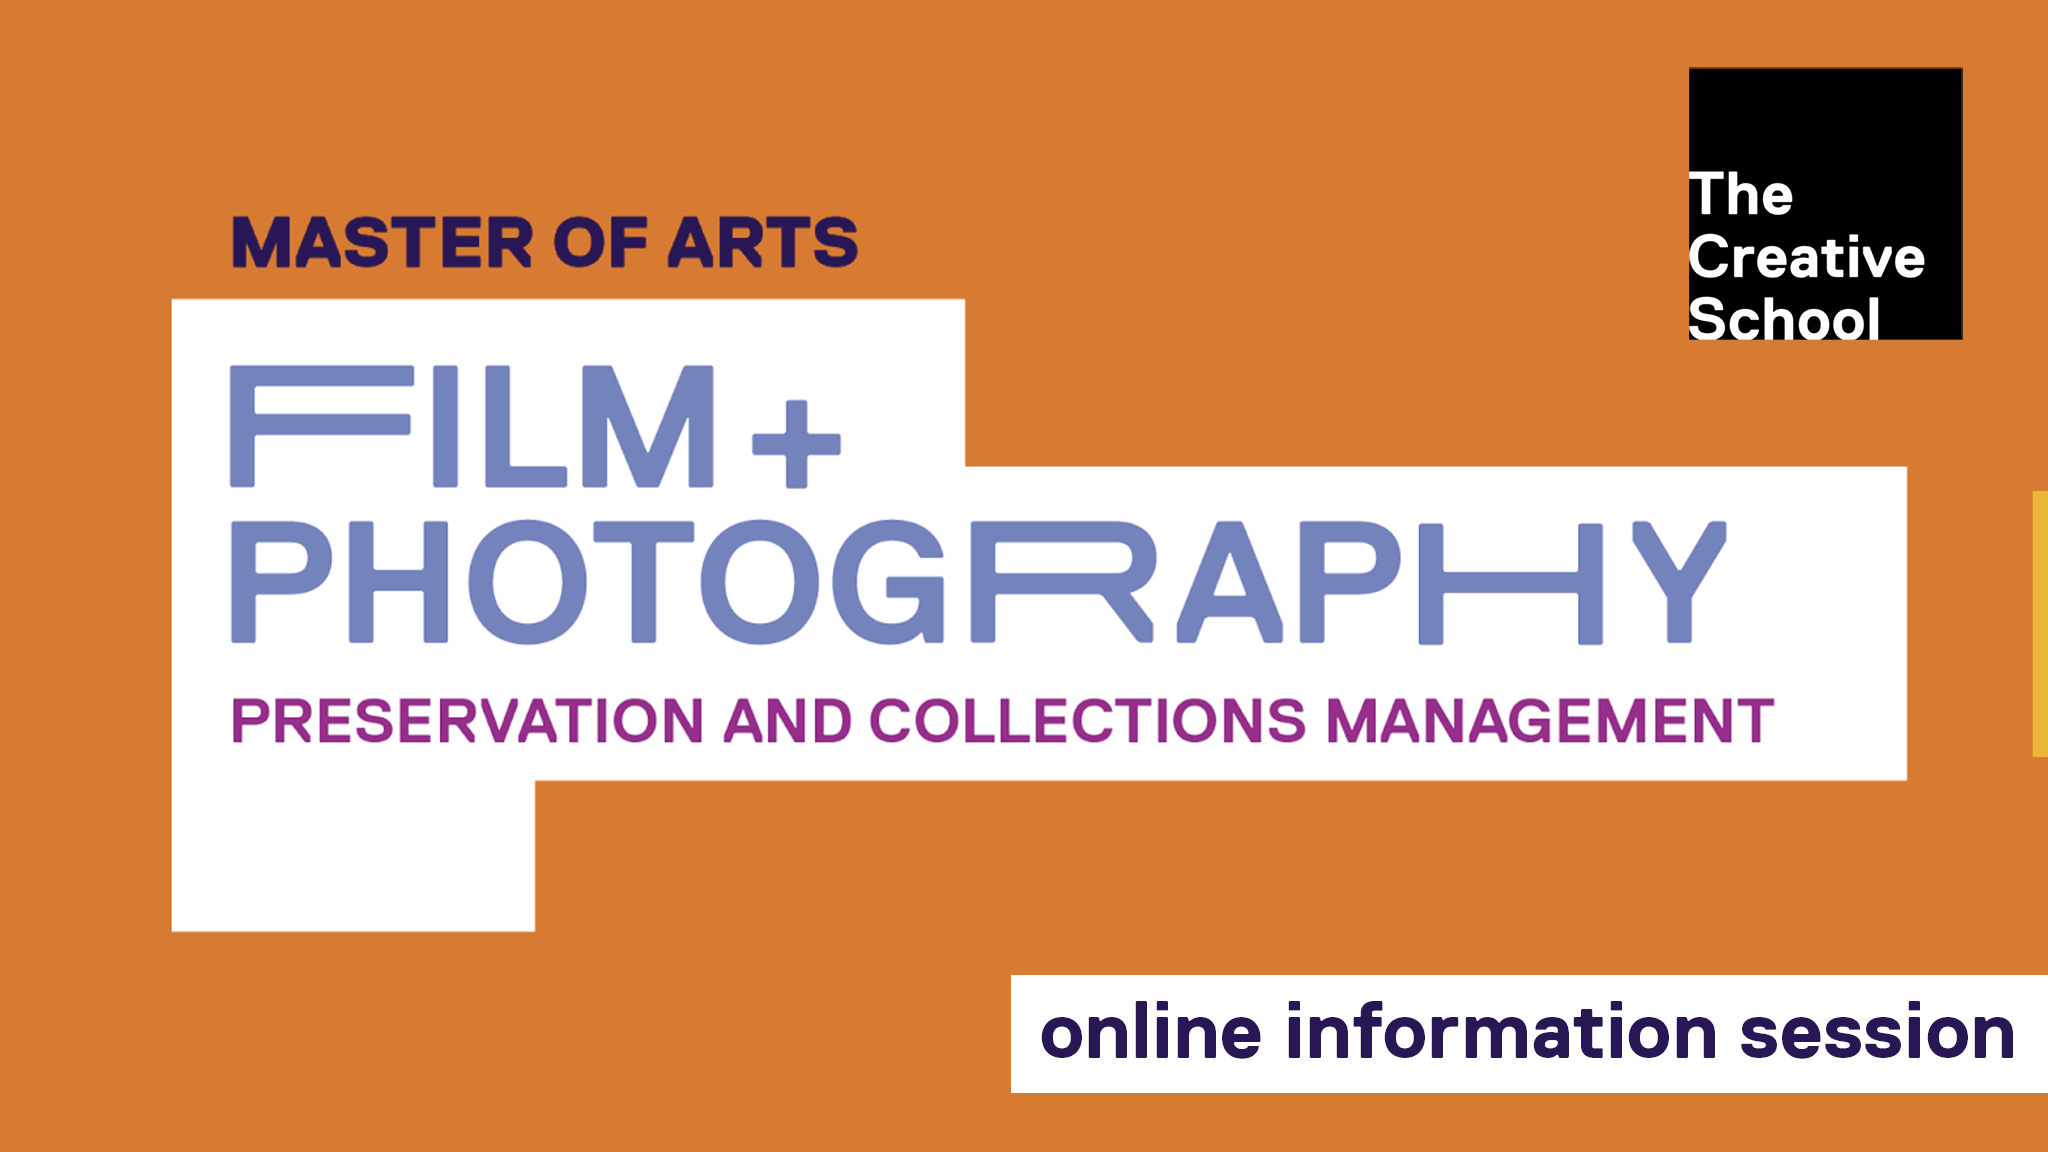 Film + Photography Preservation and Collections Management  program information session 